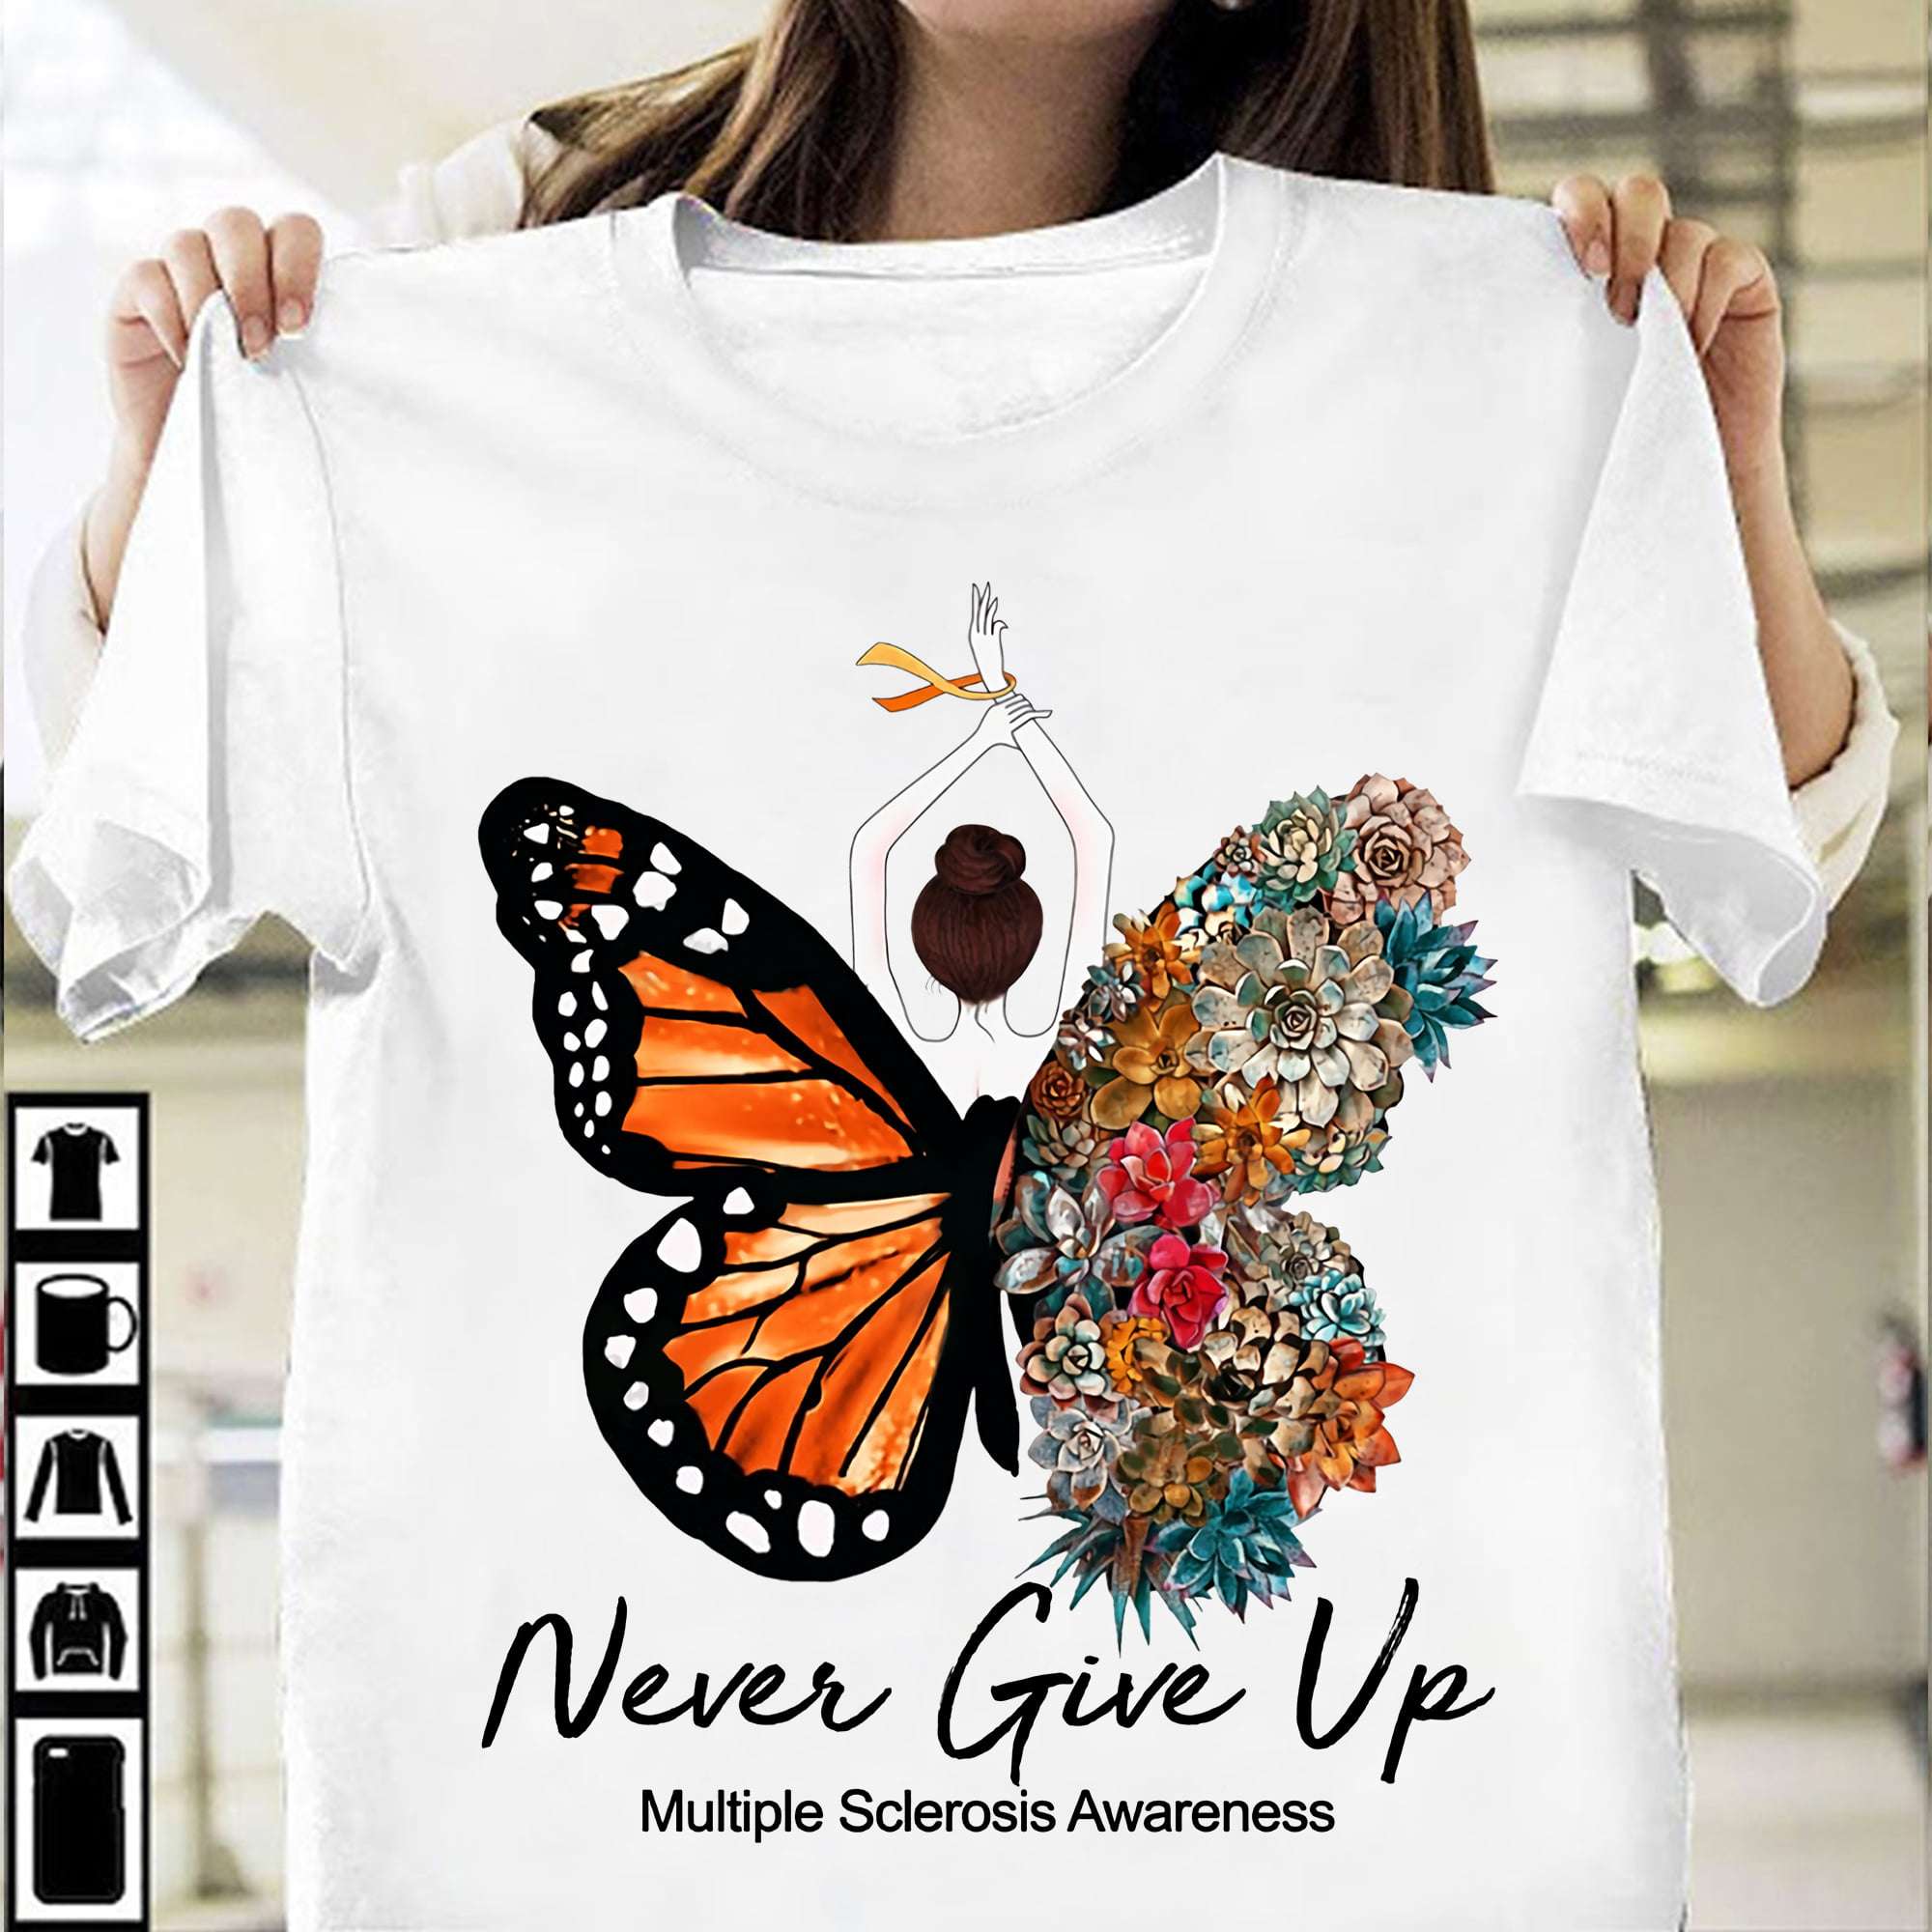 Never give up - Multiple sclerosis awareness, girl with butterfly wings